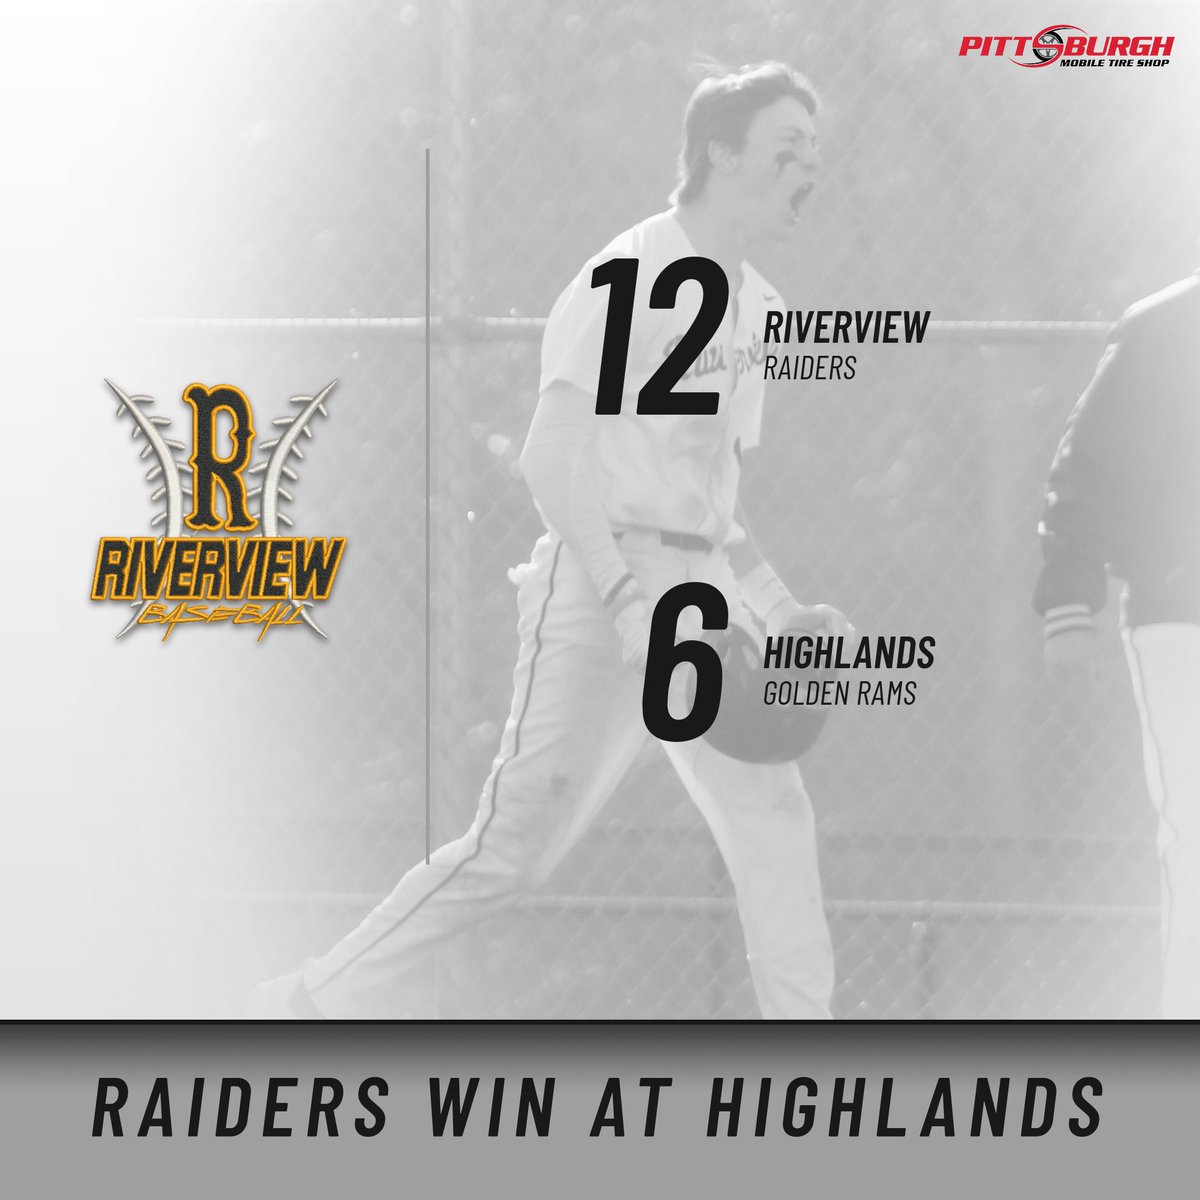 Riverview stayed late and brought home a victory vs @HighlandsGolden @RViewSports @RaiderSports10